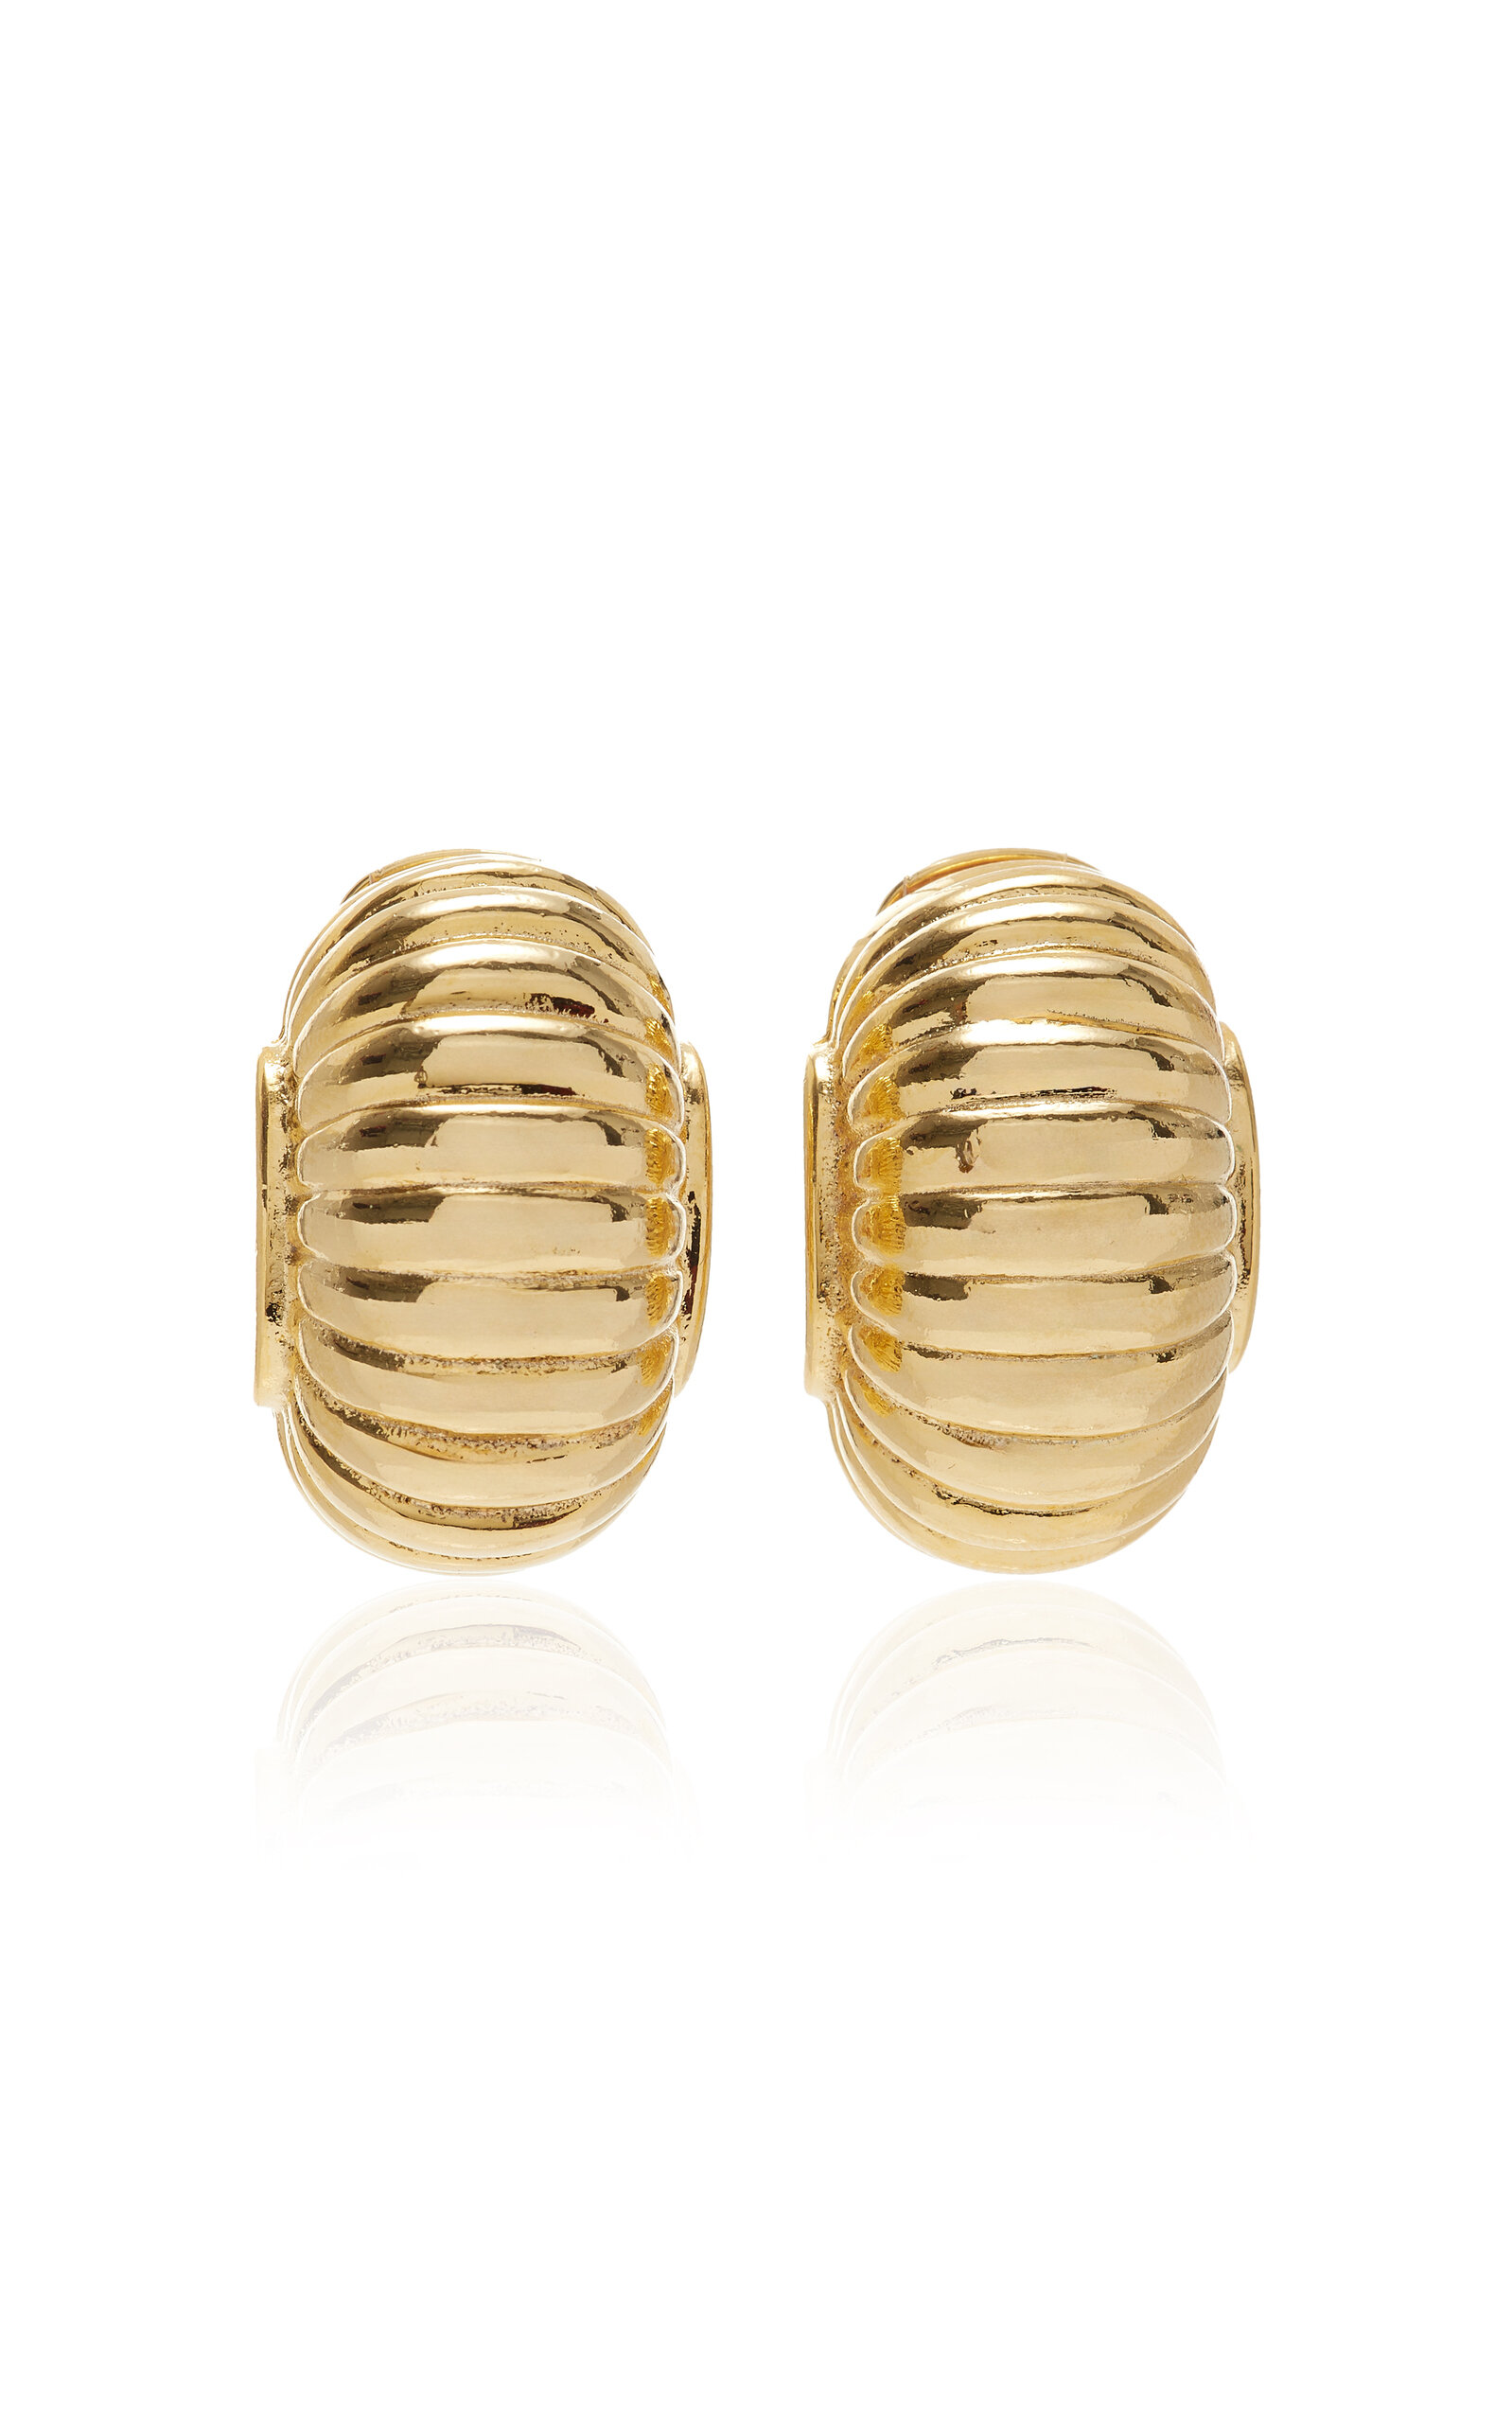 Ben-amun Exclusive Shell Shate 24k Gold-plated Earrings